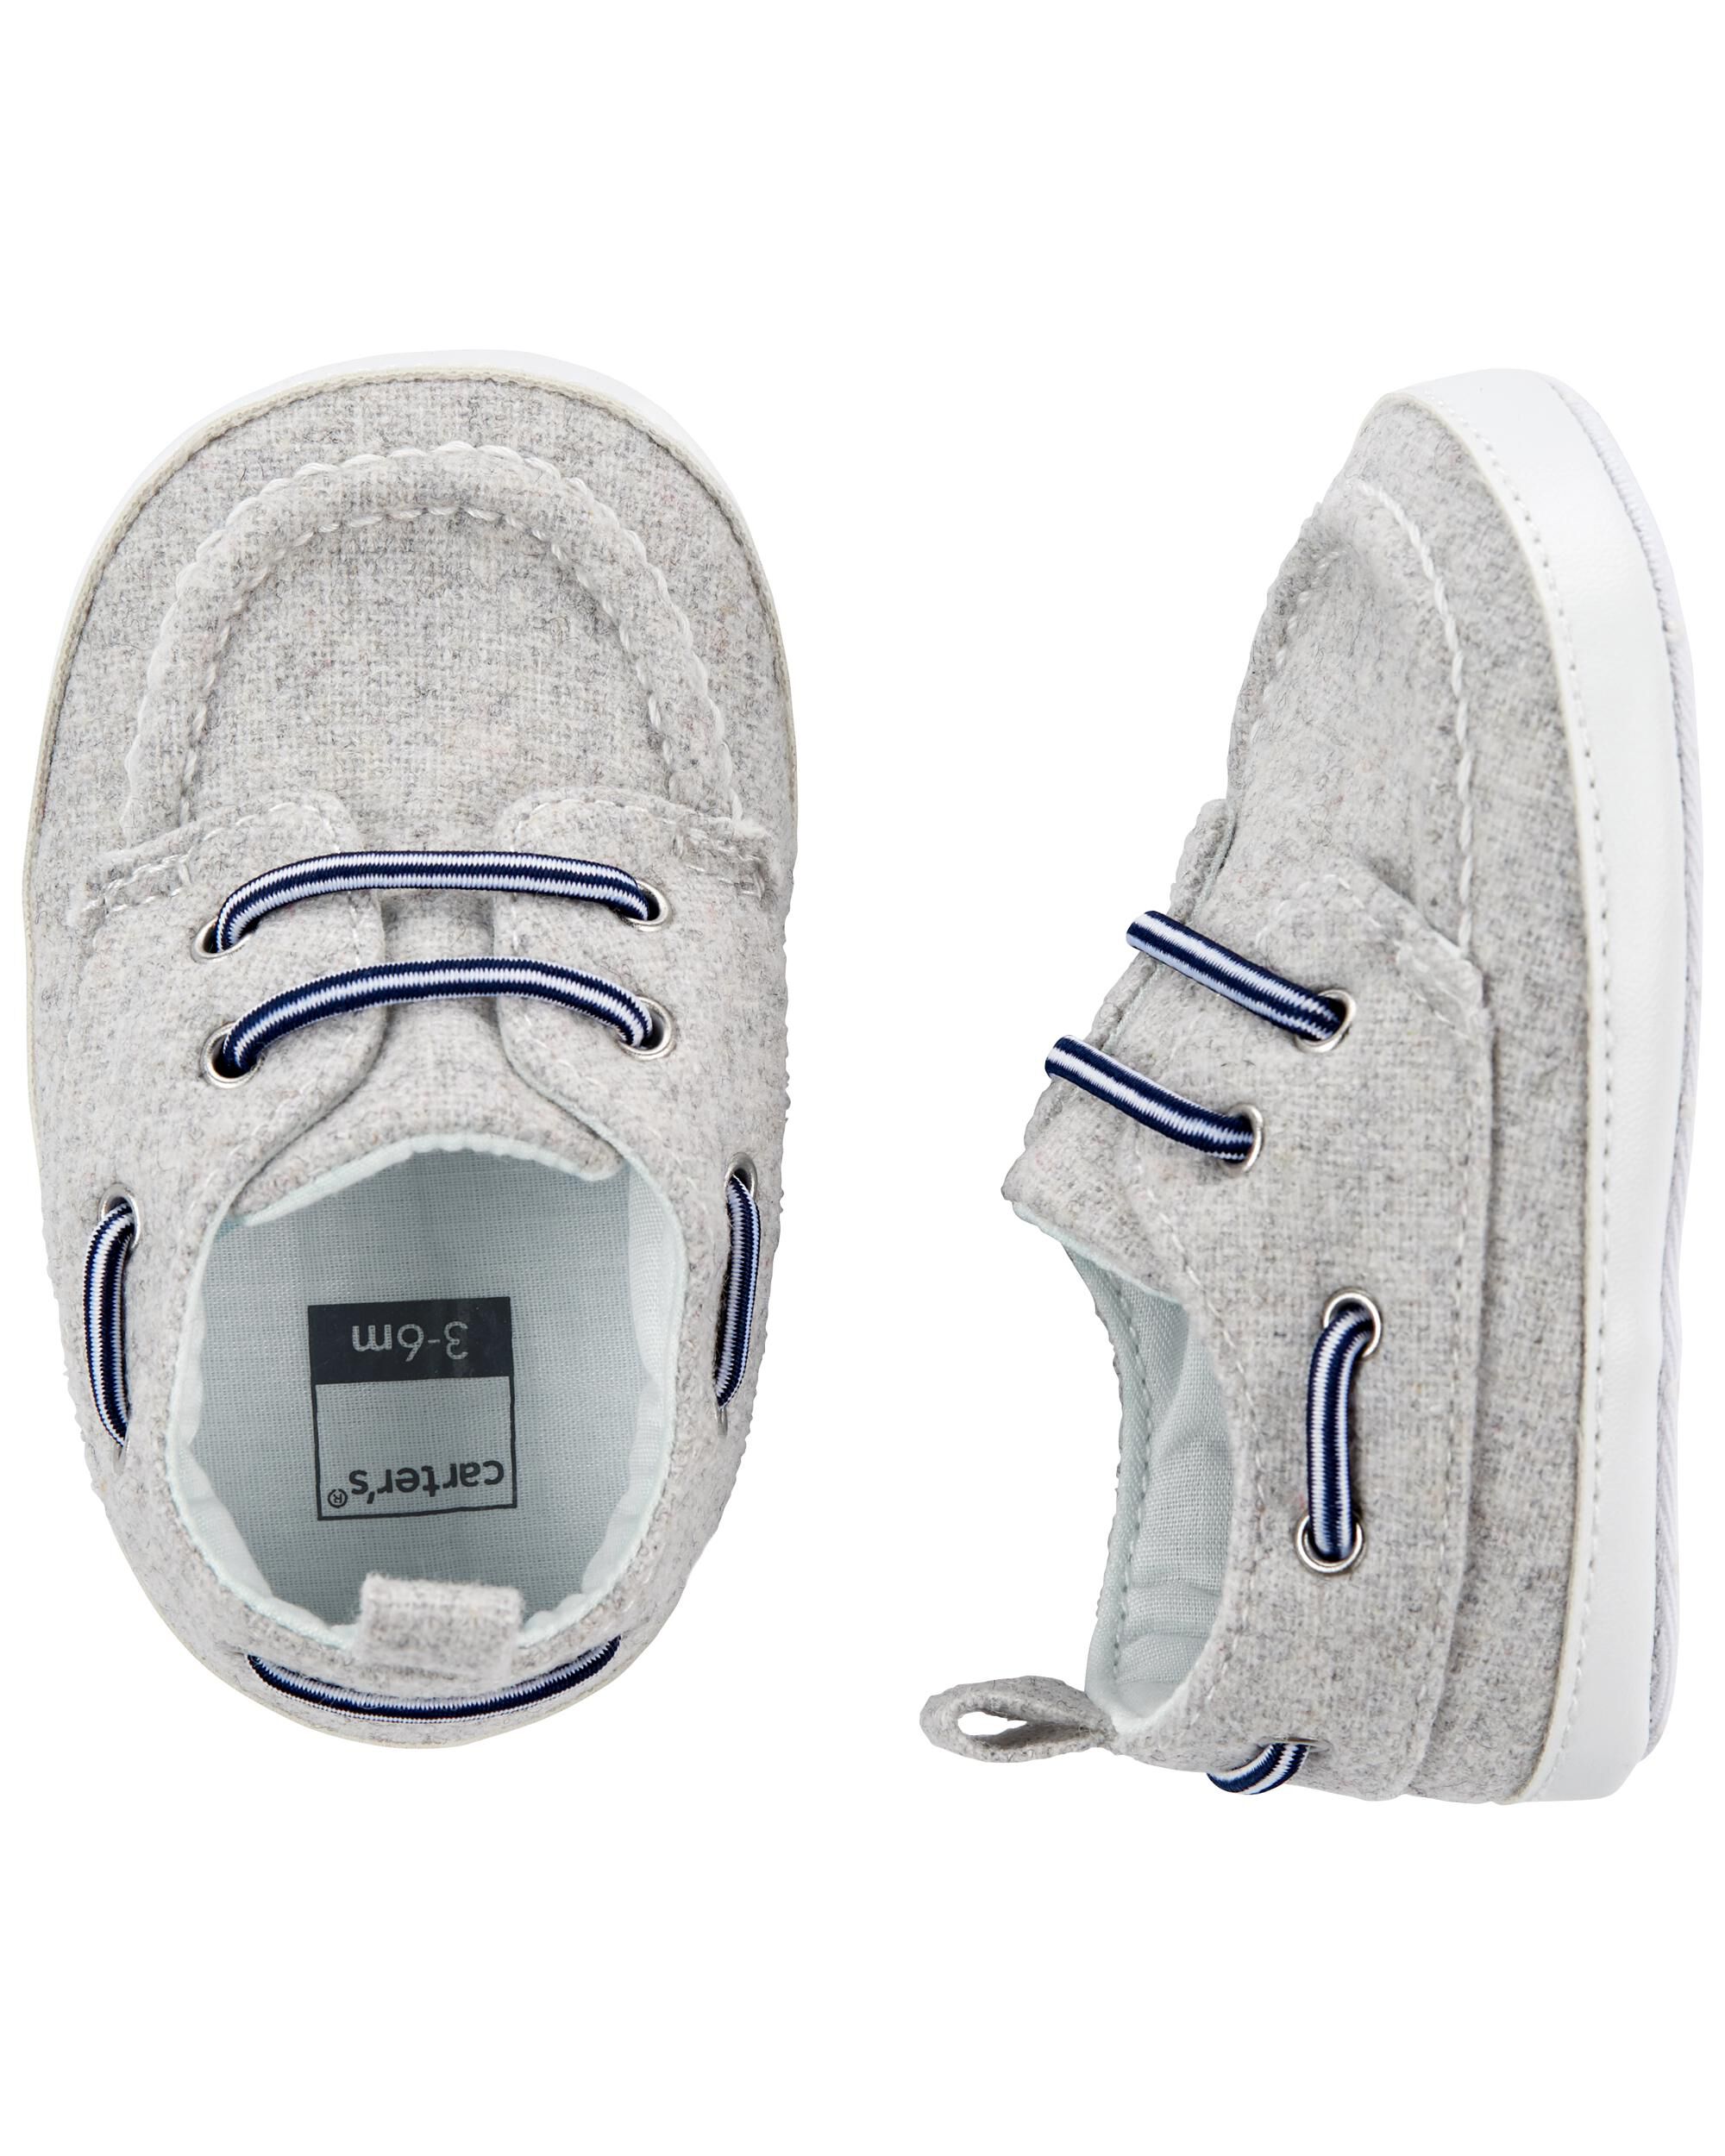 Baby Boy Shoes (Sizes 0-6) | Carter's | Free Shipping